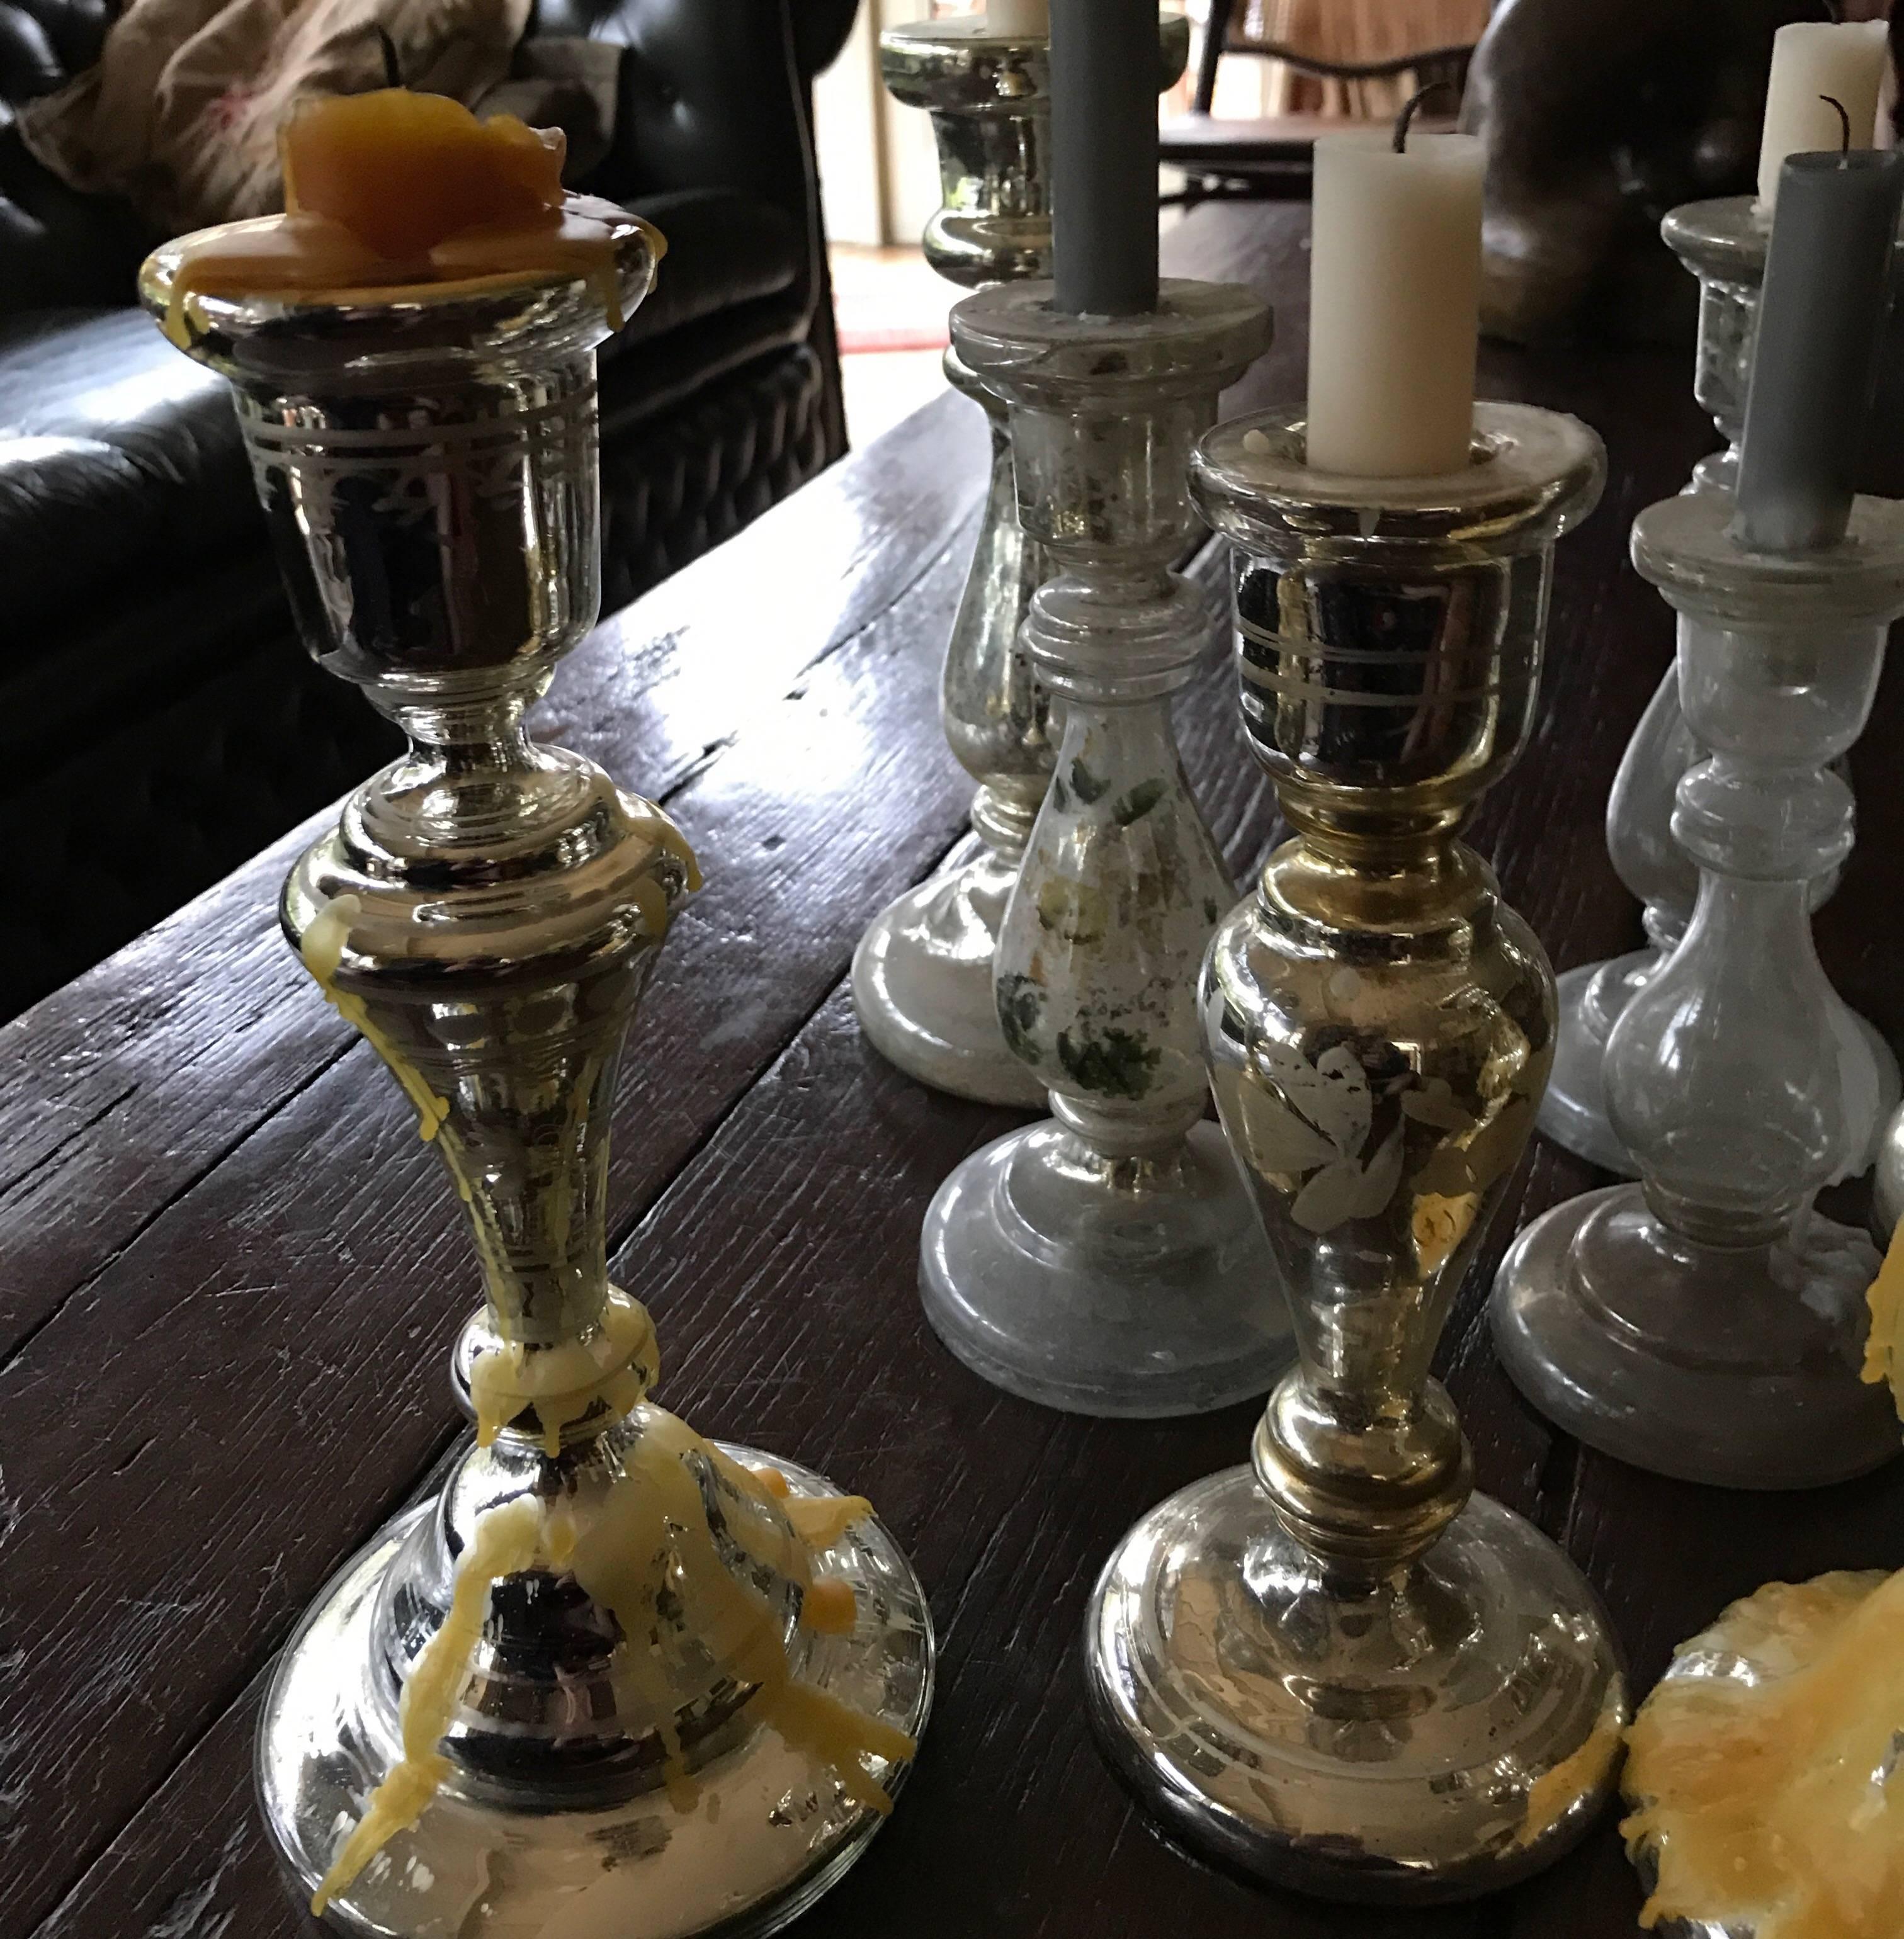 Collection off eight glass mercured, 19th century candlesticks
Old and timeless beautiful patina off vanishing old mercure on the inside off the glass candlesticks
Mercure was used to creatie a look off a silver candlestick
In fact it was the